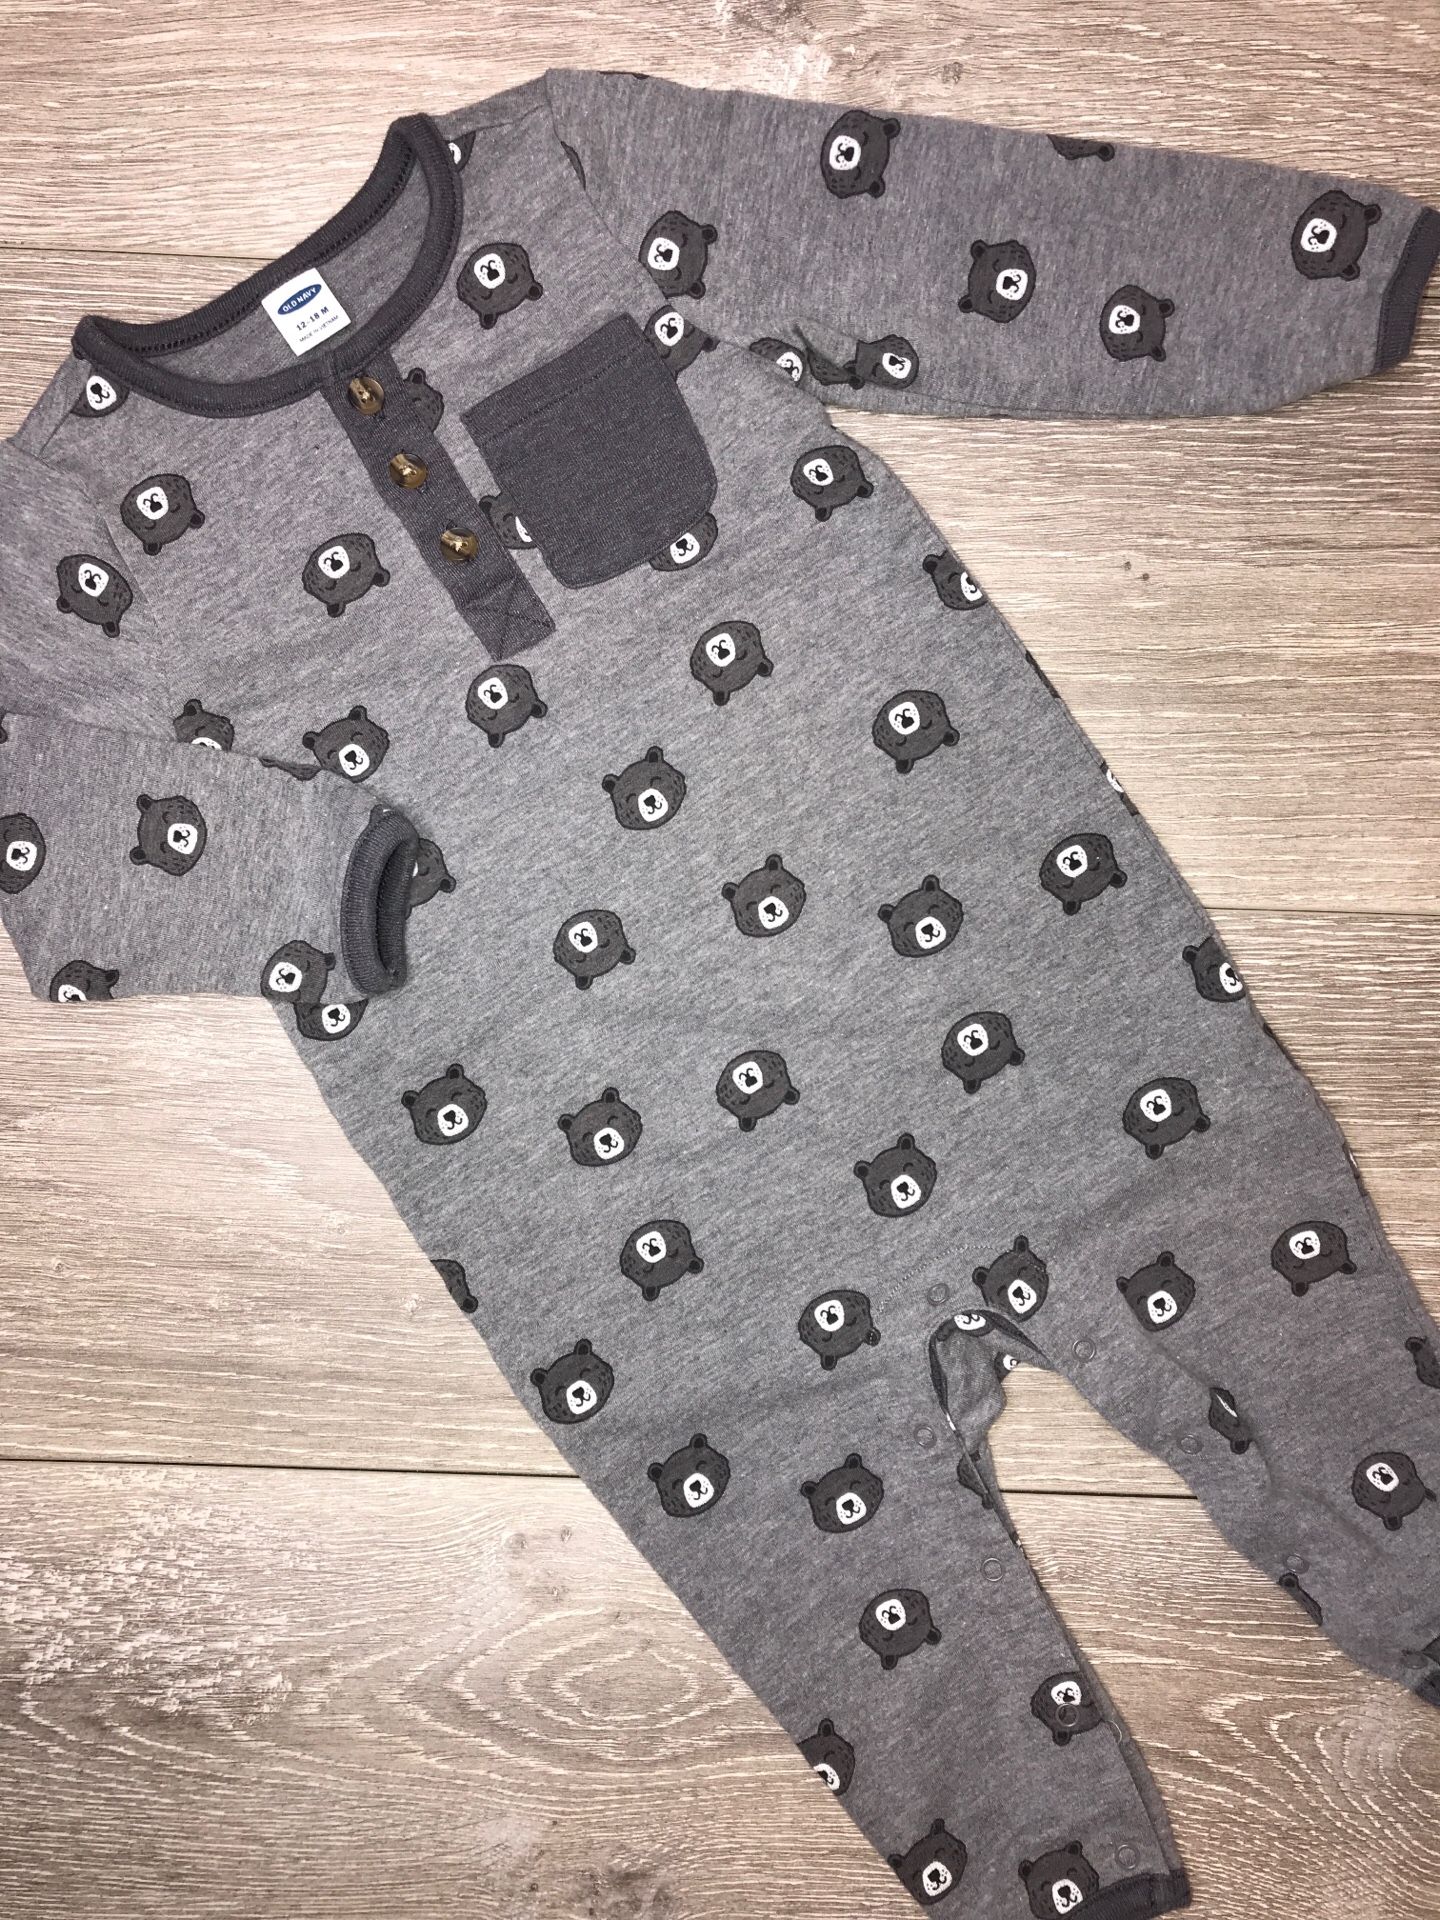 Baby Boy Clothing Old Navy 12-18 Months $4 (Pending Pickup)